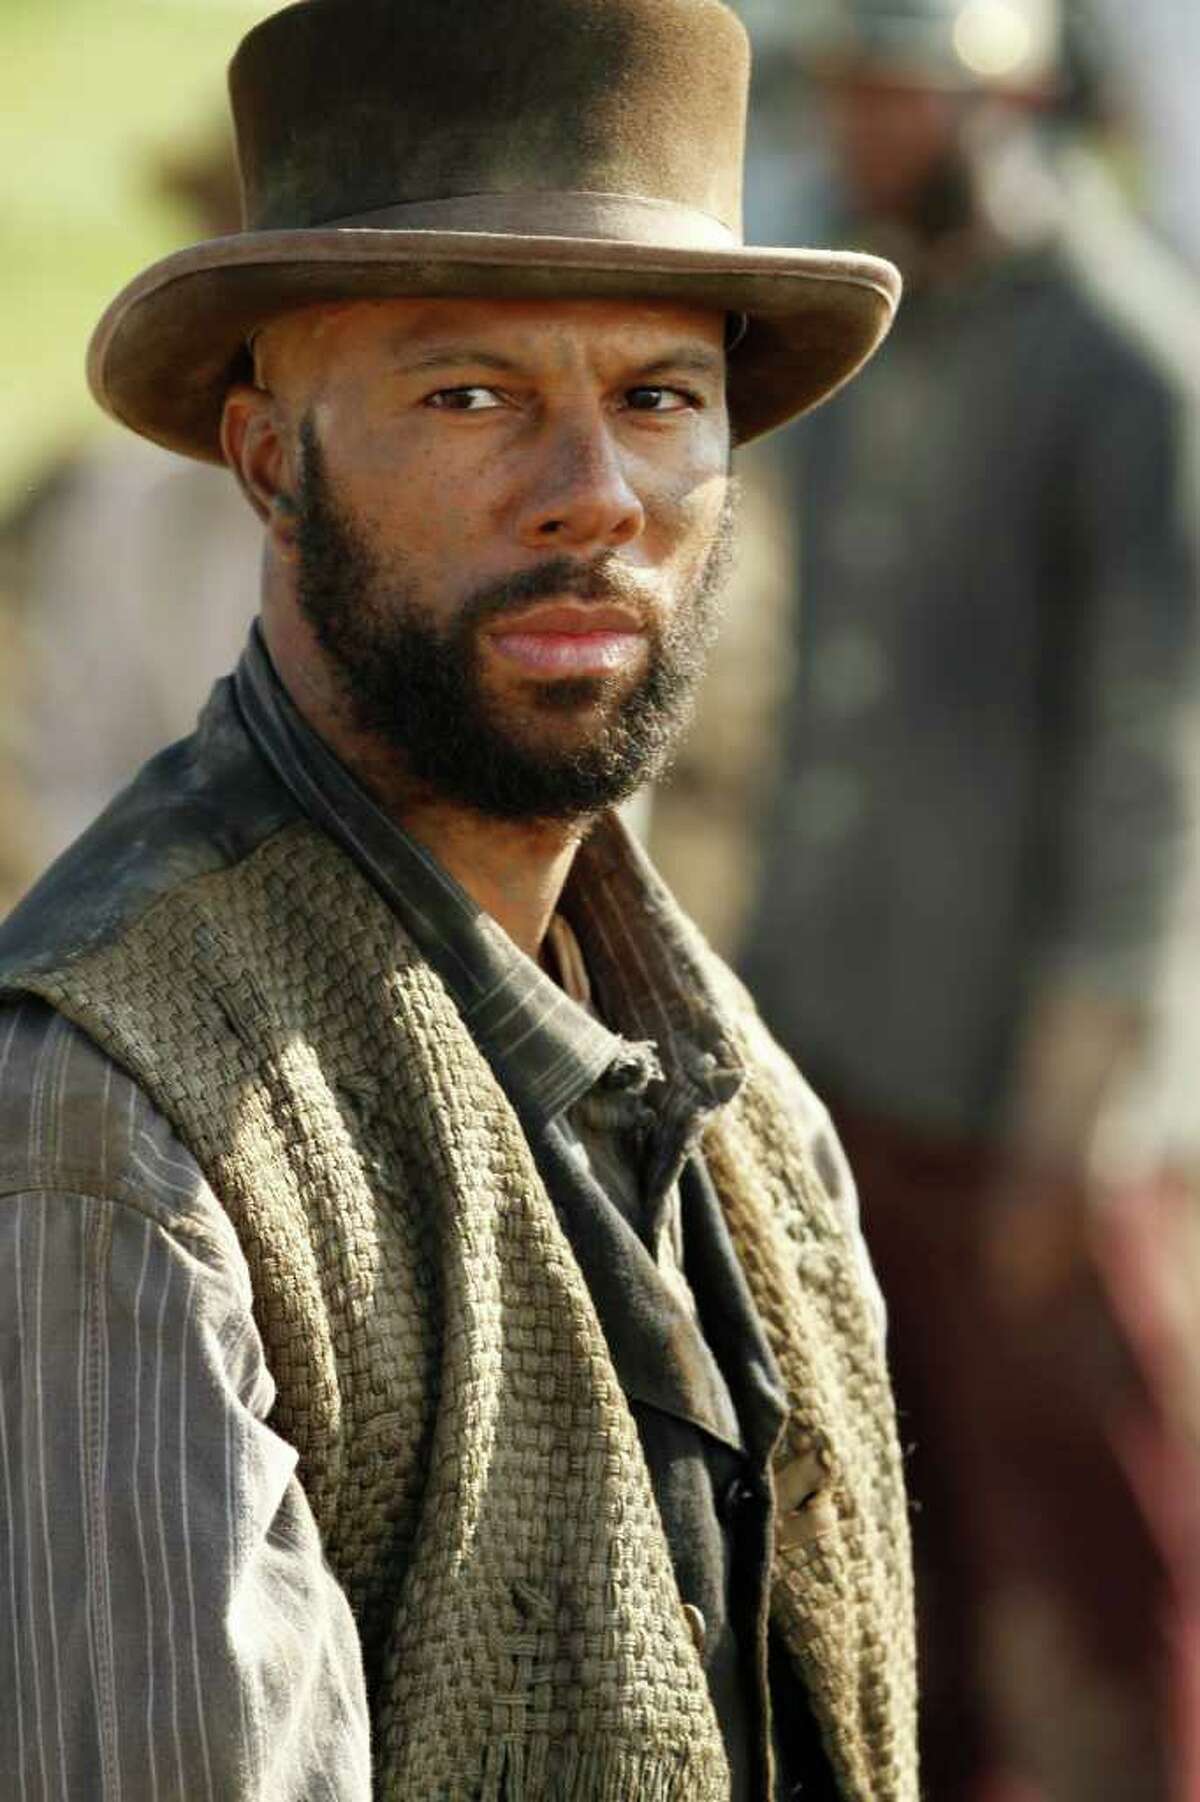 In this image released by AMC, Common portrays Elam Ferguson in the original series "Hell On Wheels," premiering, Sunday at 10 p.m. EST on AMC. (AP Photo/AMC, Chris Large)